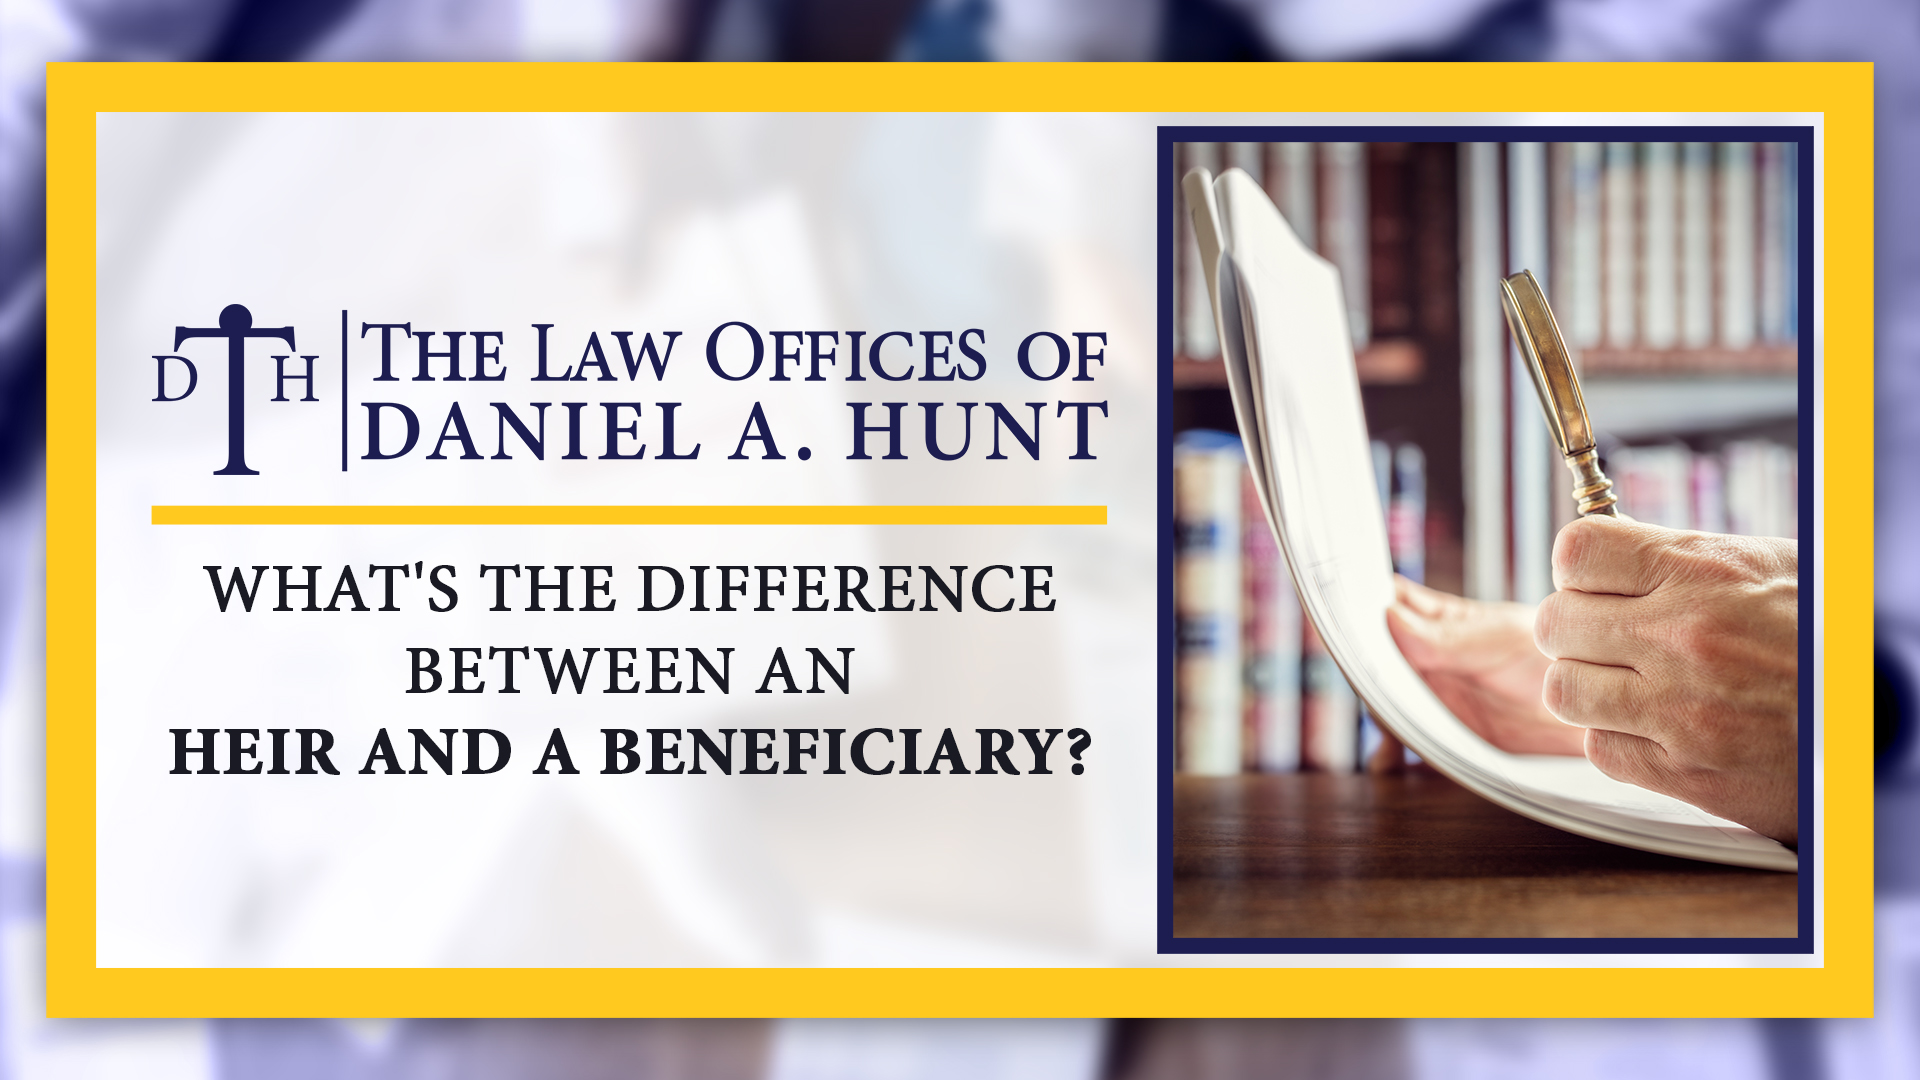 What's the Difference Between an Heir and a Beneficiary?